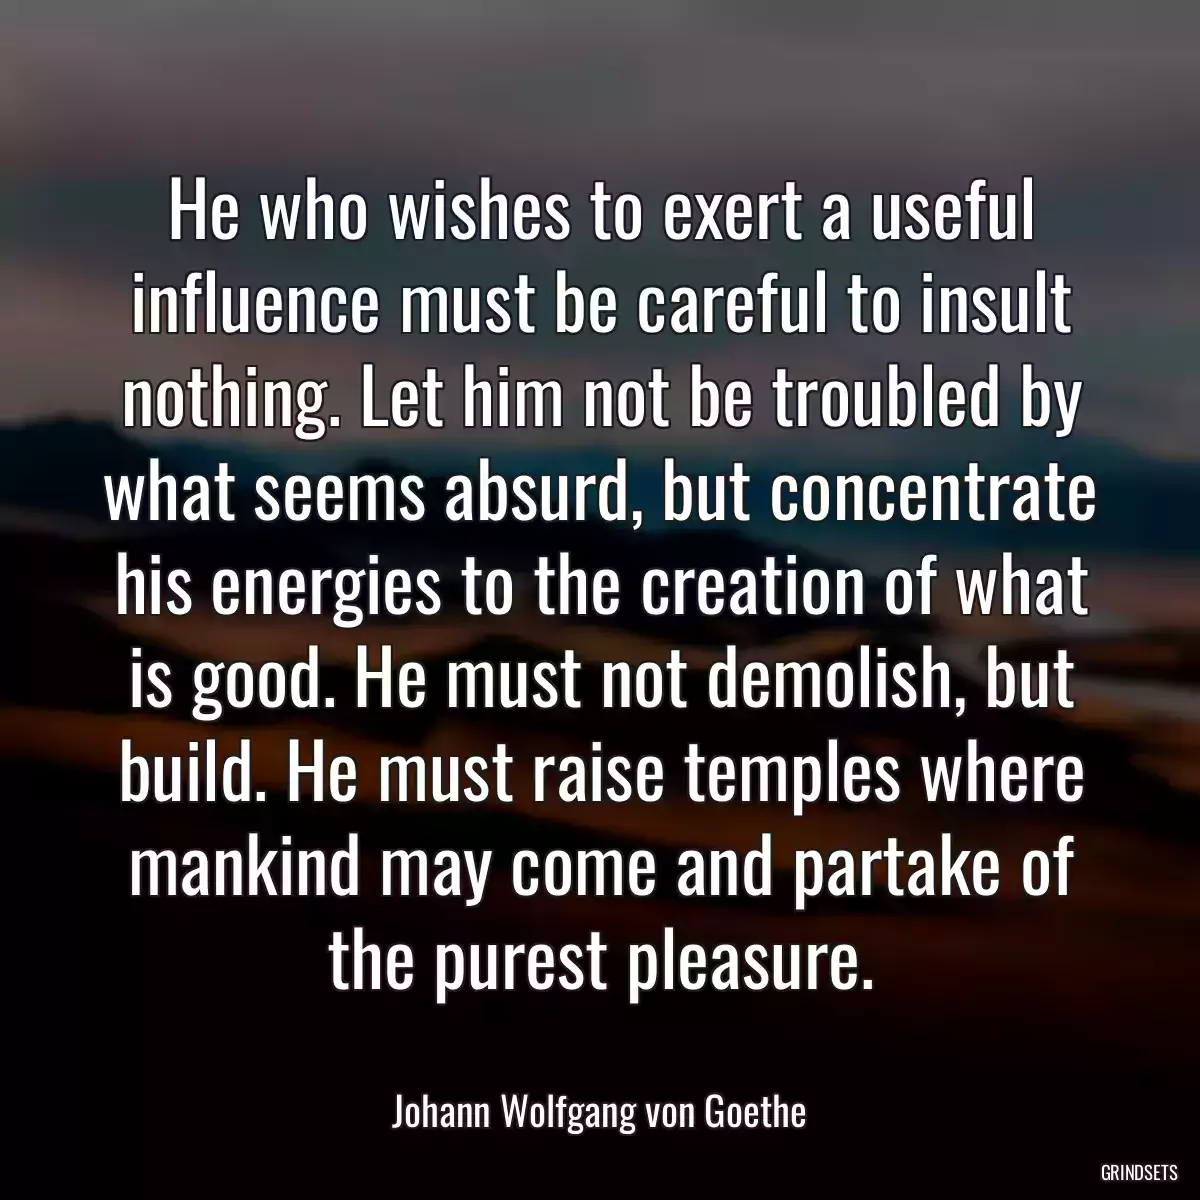 He who wishes to exert a useful influence must be careful to insult nothing. Let him not be troubled by what seems absurd, but concentrate his energies to the creation of what is good. He must not demolish, but build. He must raise temples where mankind may come and partake of the purest pleasure.